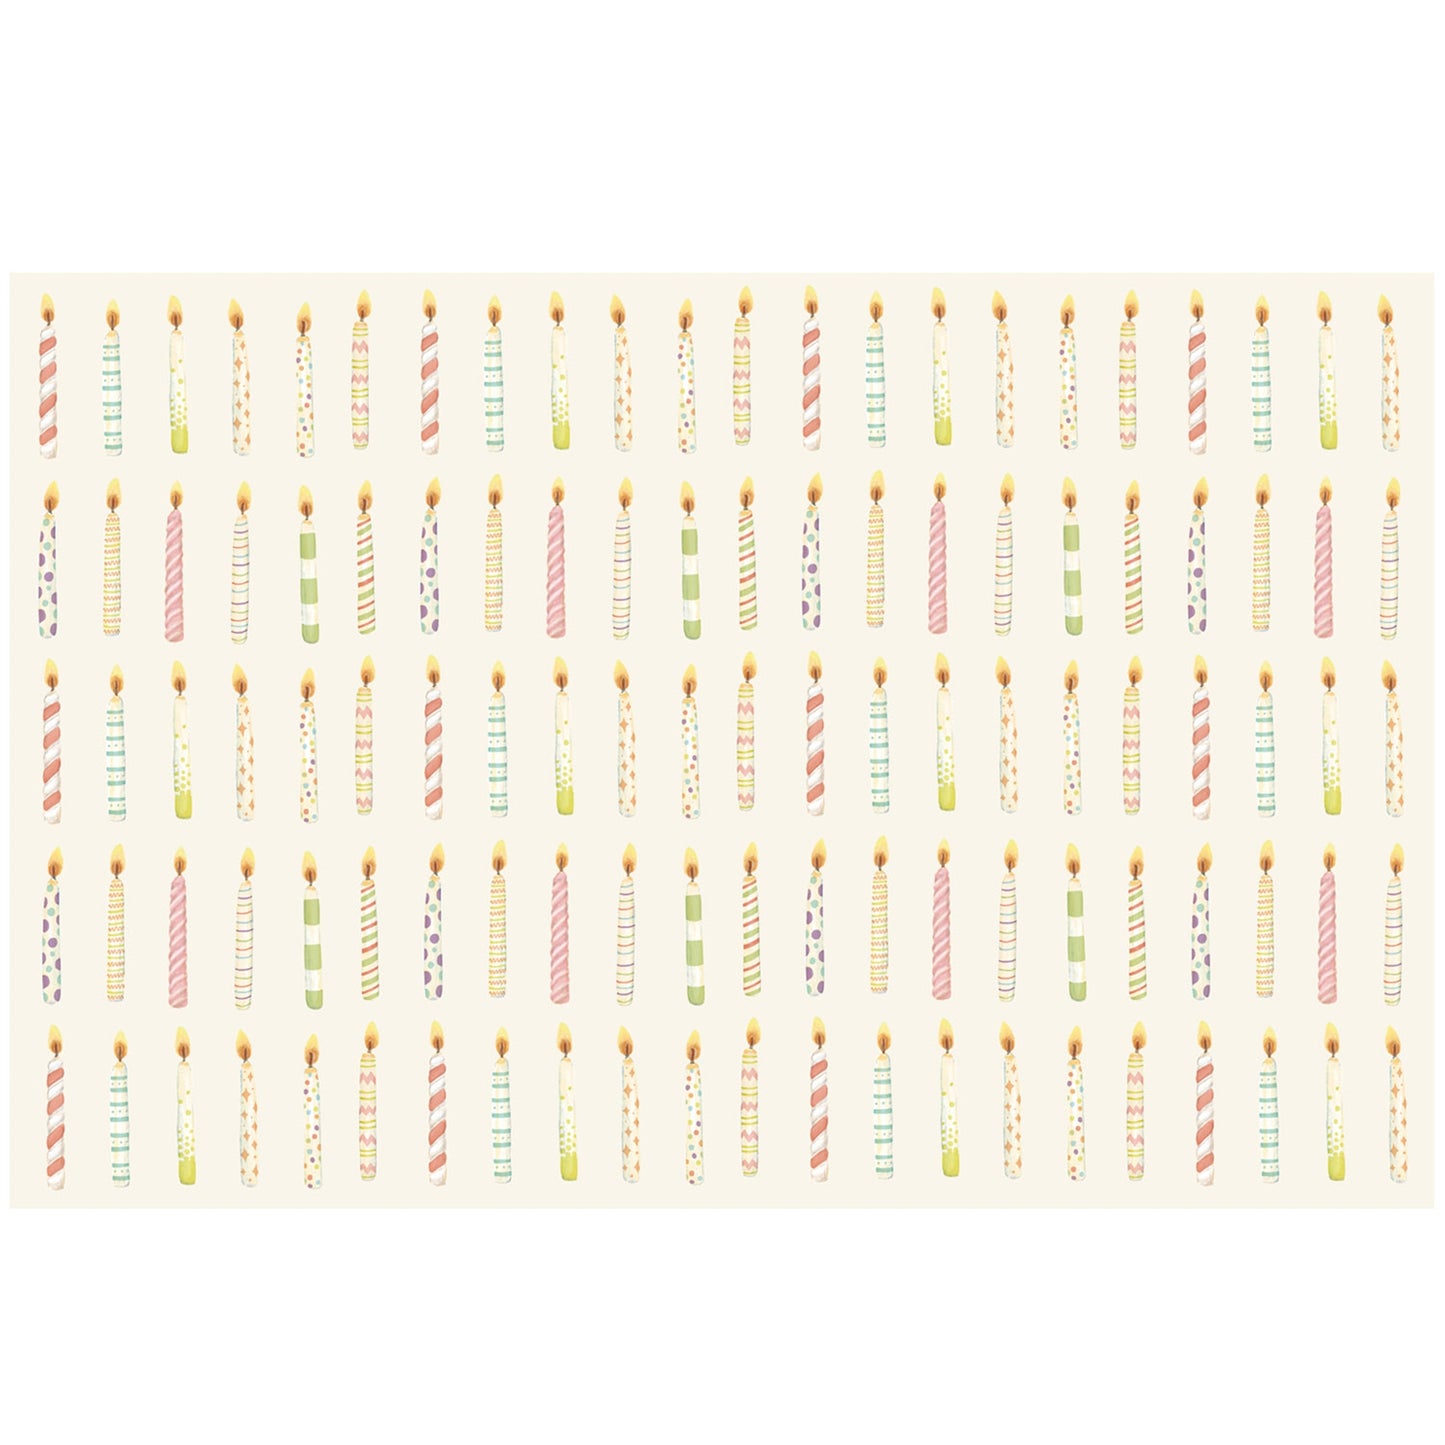 Our Birthday Candles Placemat doesn’t care how old you are – just that you’re ready to party!